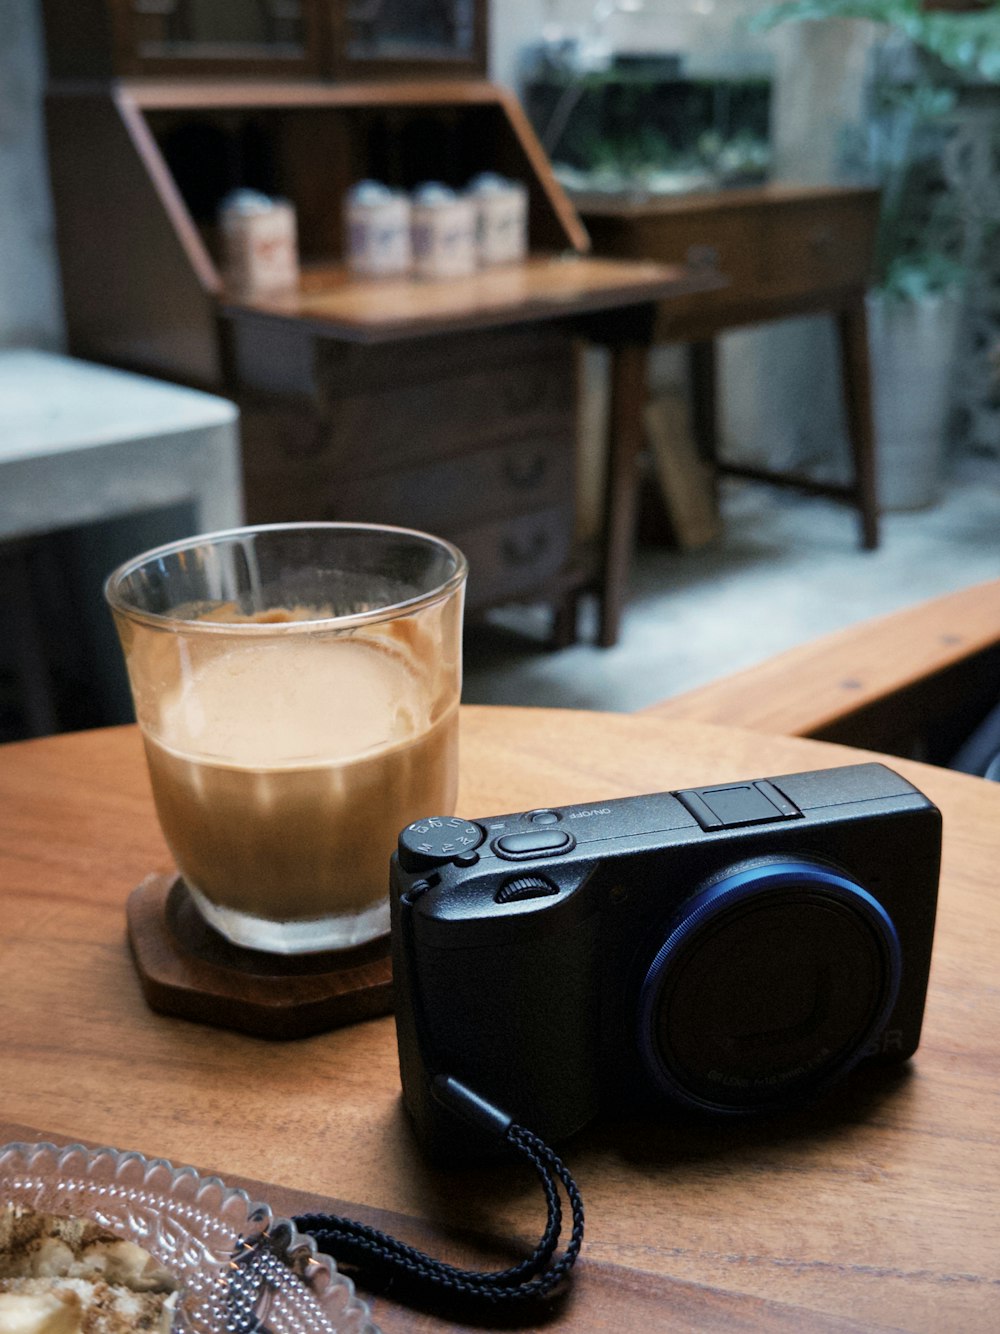 a camera sitting on a table next to a cup of coffee